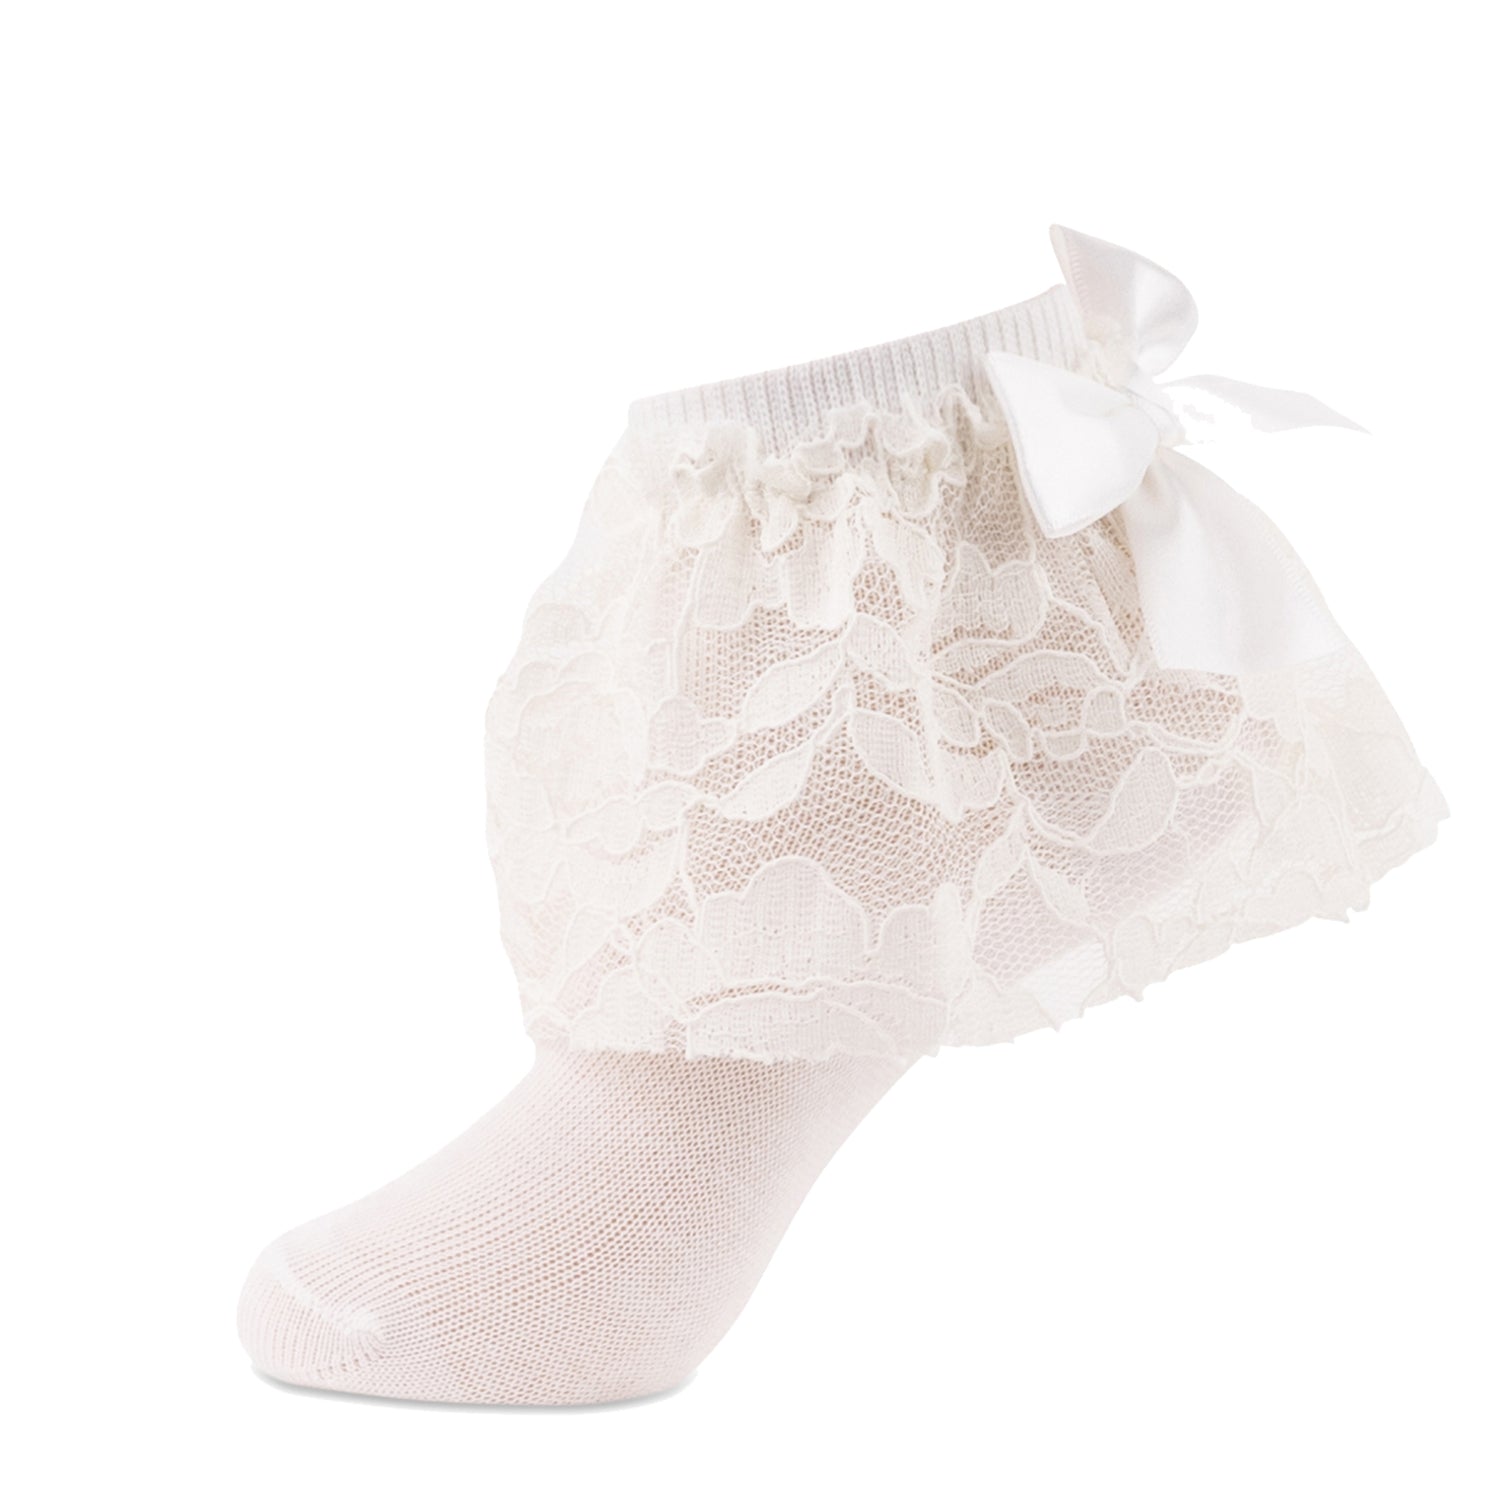 jrp sock girls ivory floral lace ruffle anklet sock